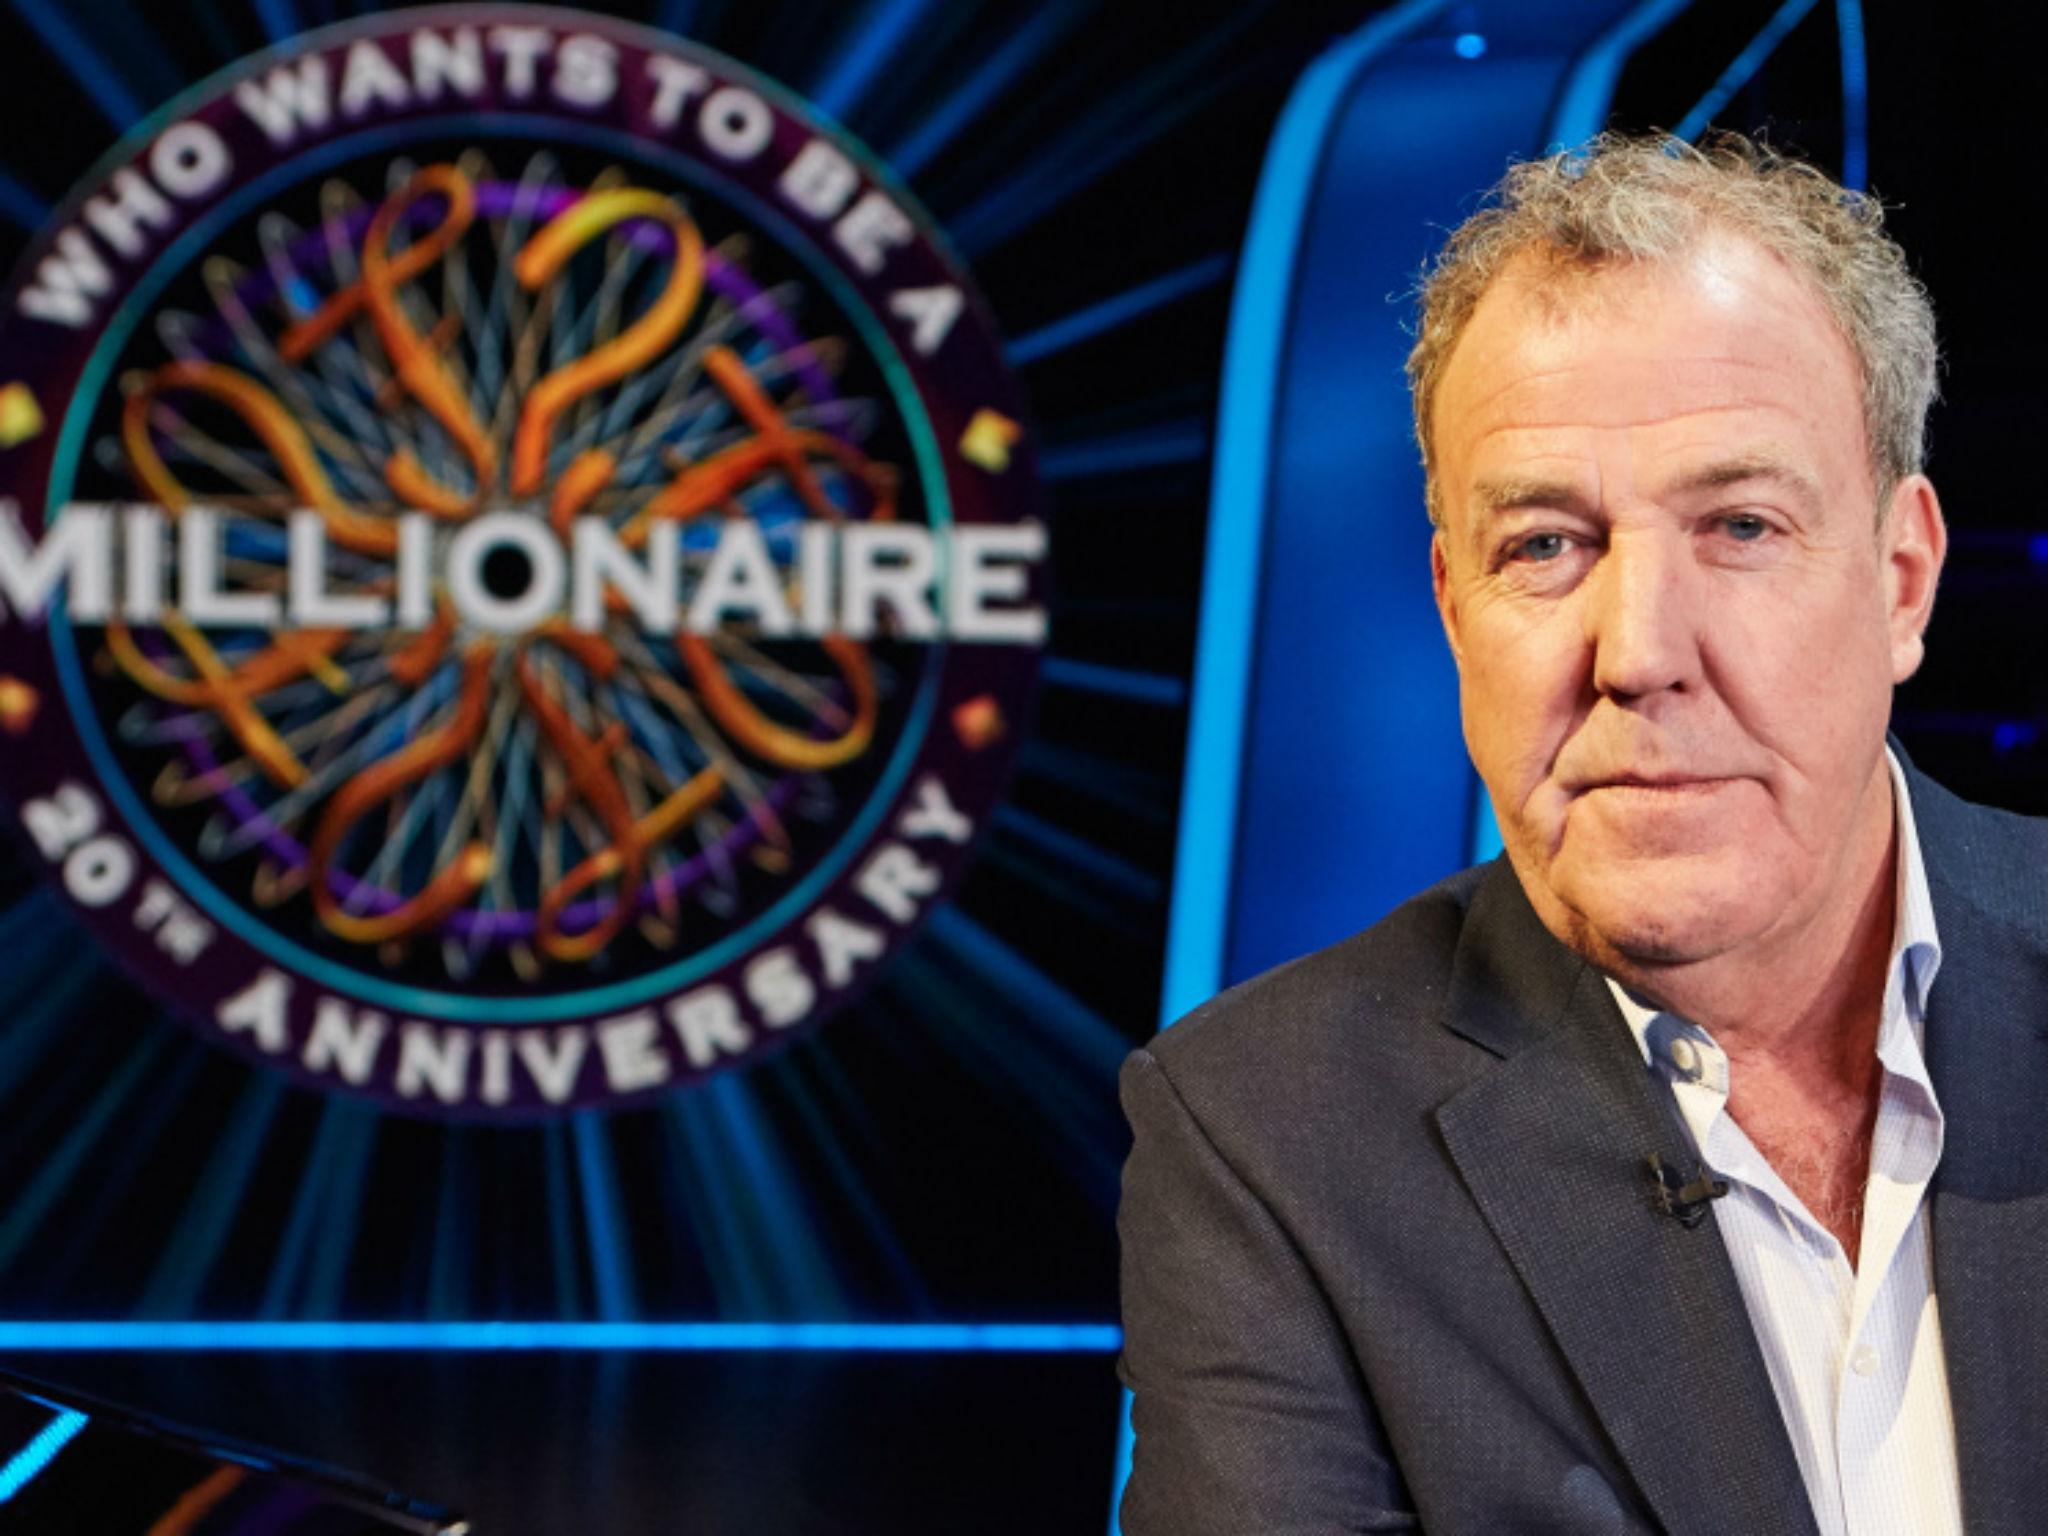 Jeremy Clarkson presents ‘Who Wants to Be a Millionaire?’